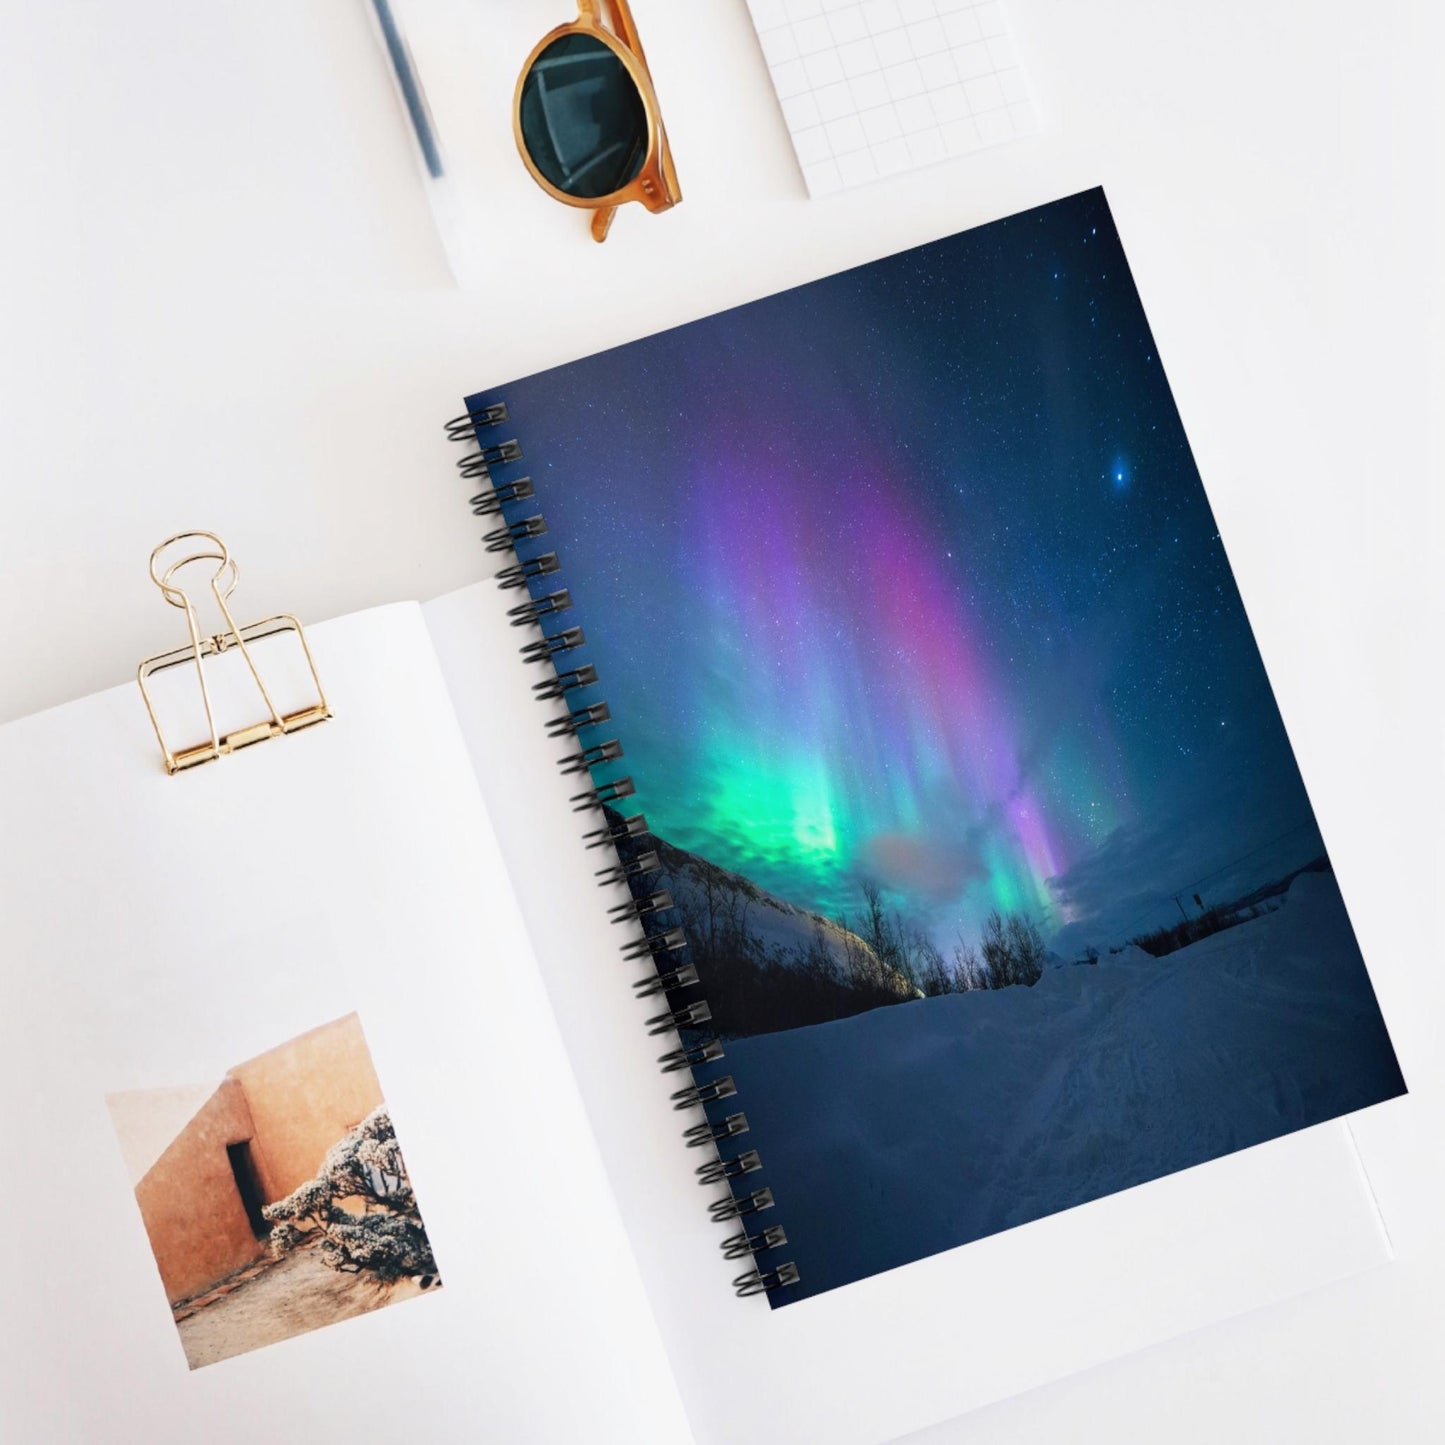 Unique Aurora Borealis Spiral Notebook Ruled Line - Personalized Northern Light View - Stationary Accessories - Perfect Aurora Lovers Gift 22